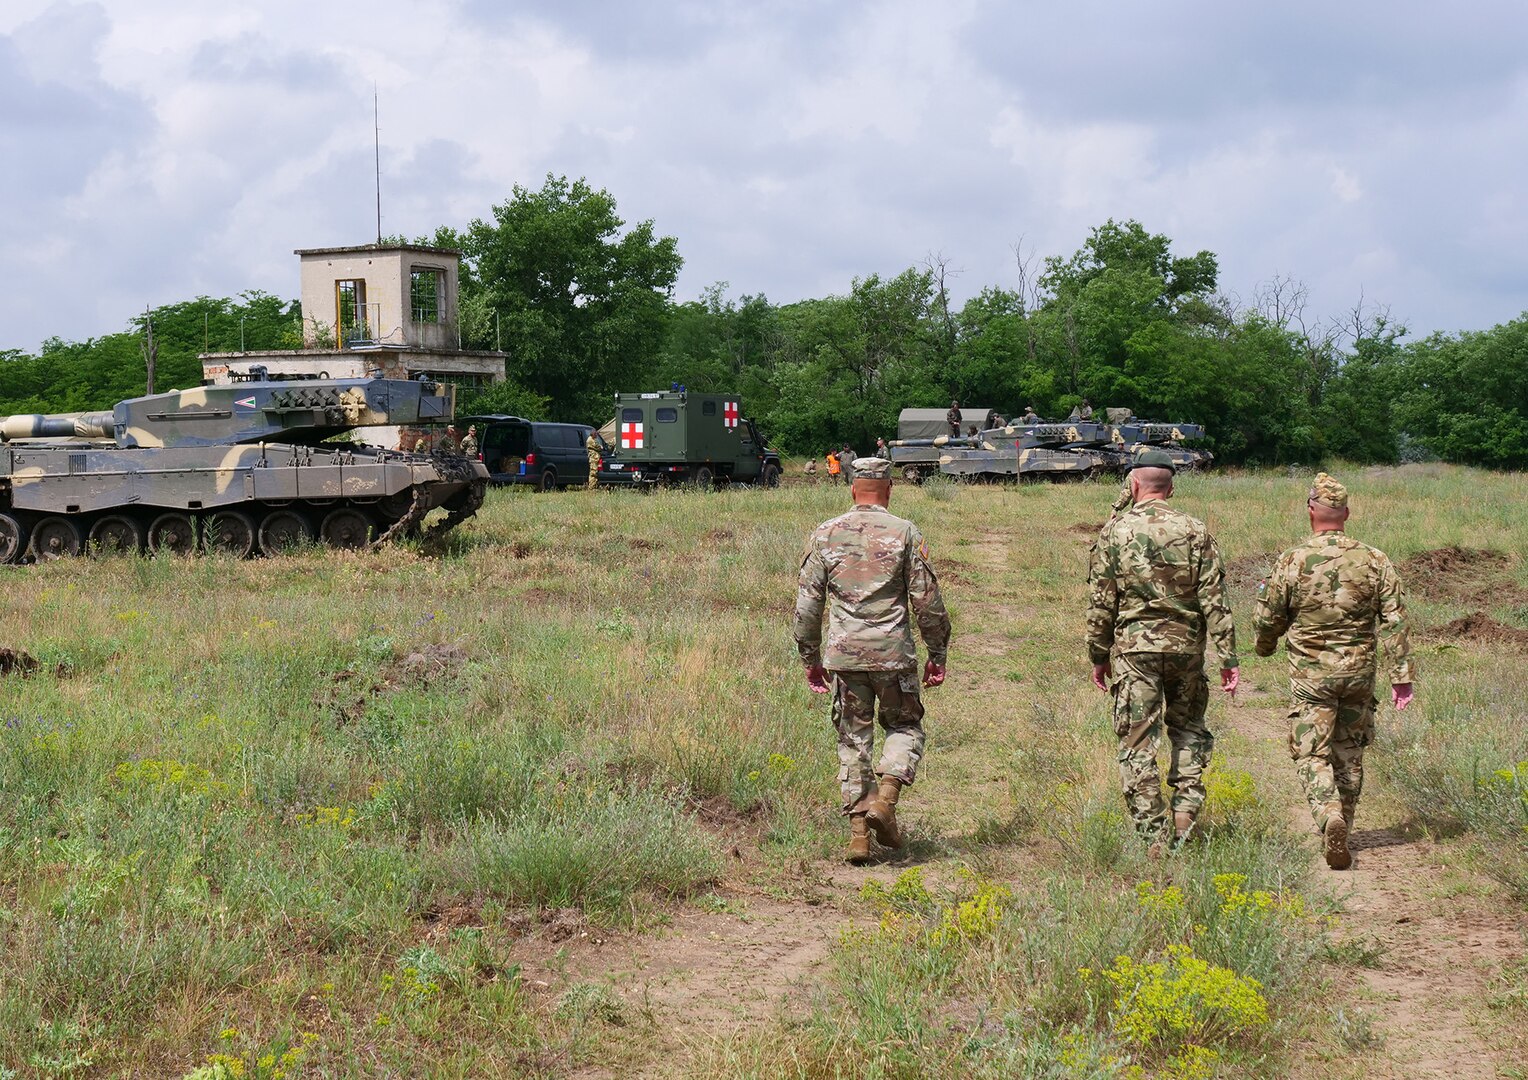 Maj. Gen. John C. Harris Jr. (left), Ohio adjutant general, visits a military vehicle driving range with a delegation from the Hungarian Defence Forces during an infantry brigade presentation and showcase event June 9, 2022, in Tata, Hungary.